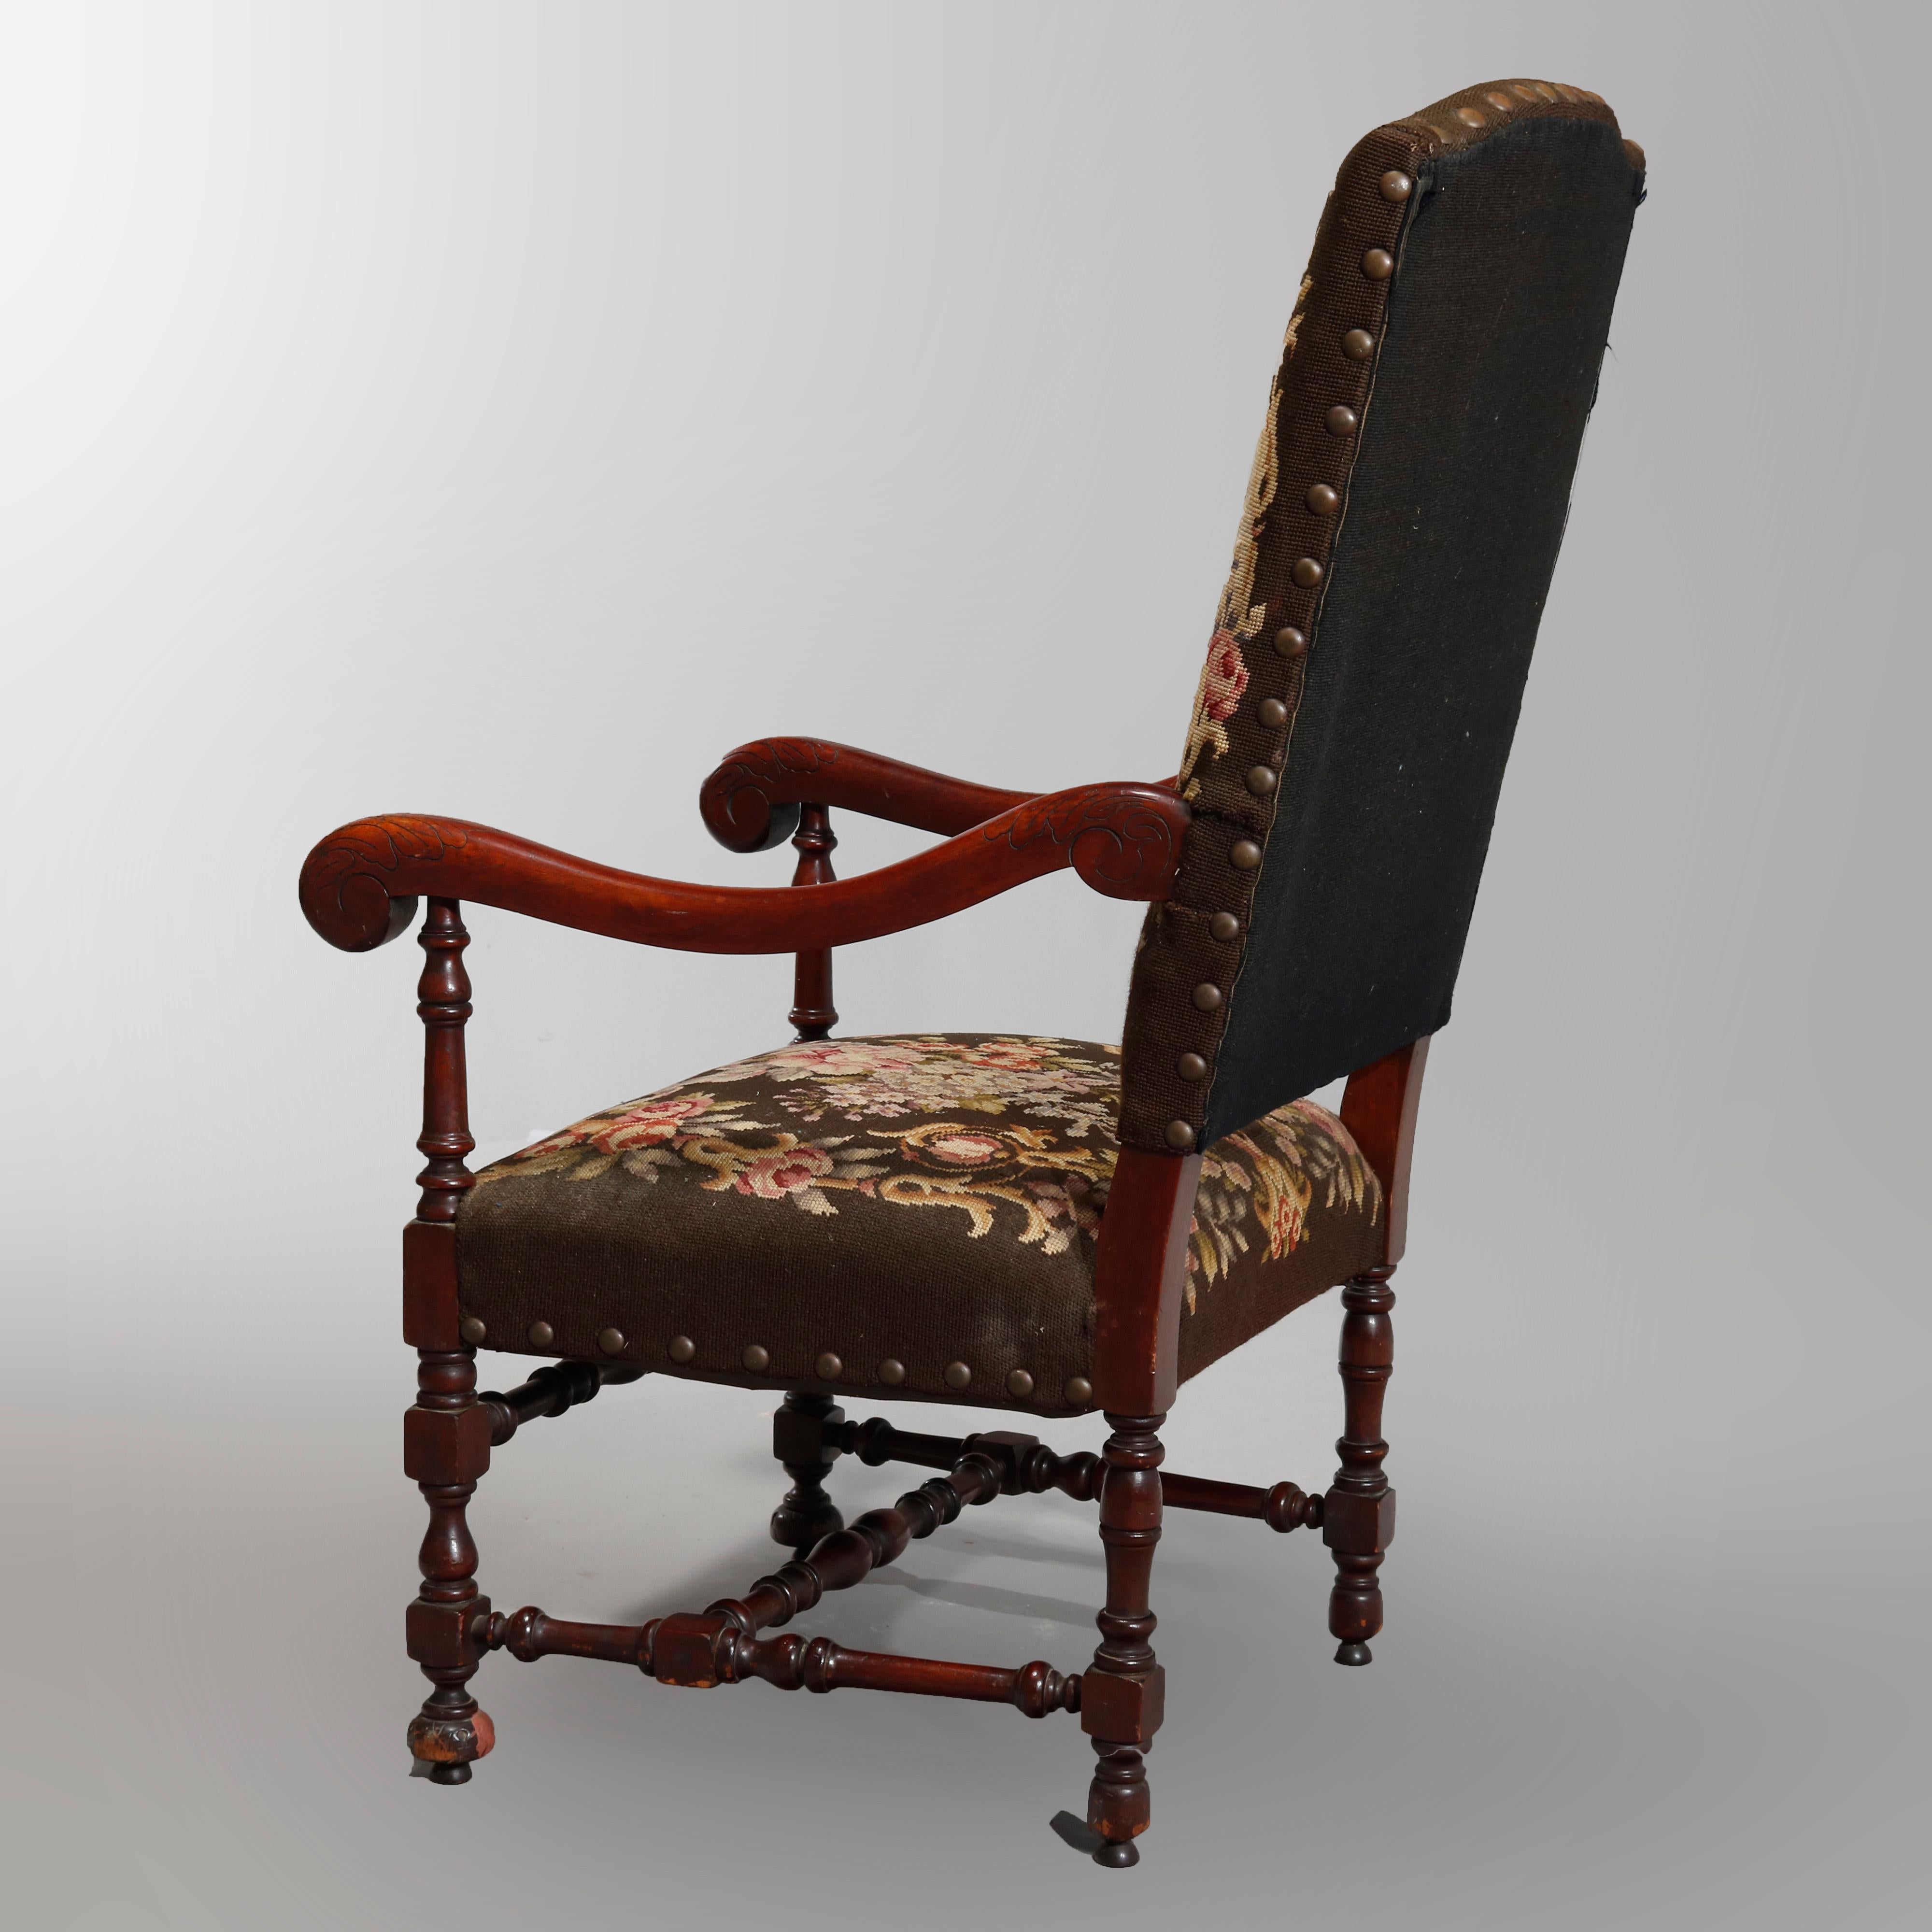 An antique English William and Mary tall back throne chair offers mahogany frame, shaped back with needlepoint upholstery having central courting scene, scroll form arms surmounting needlepoint seat raised on balustrade legs, circa 1900

Measures-